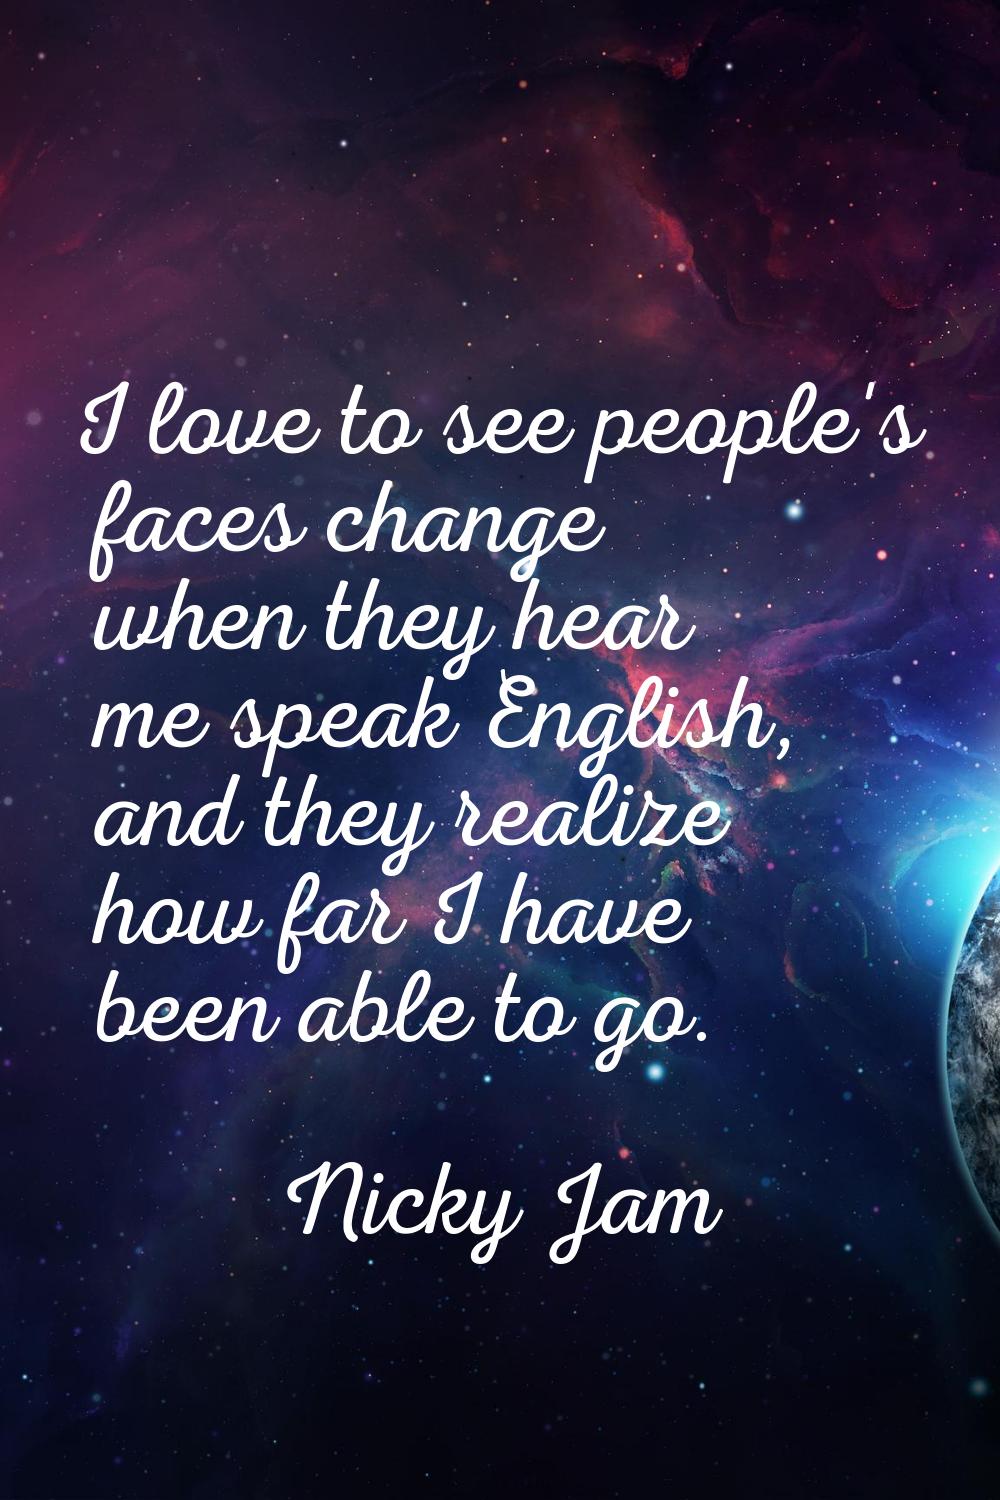 I love to see people's faces change when they hear me speak English, and they realize how far I hav